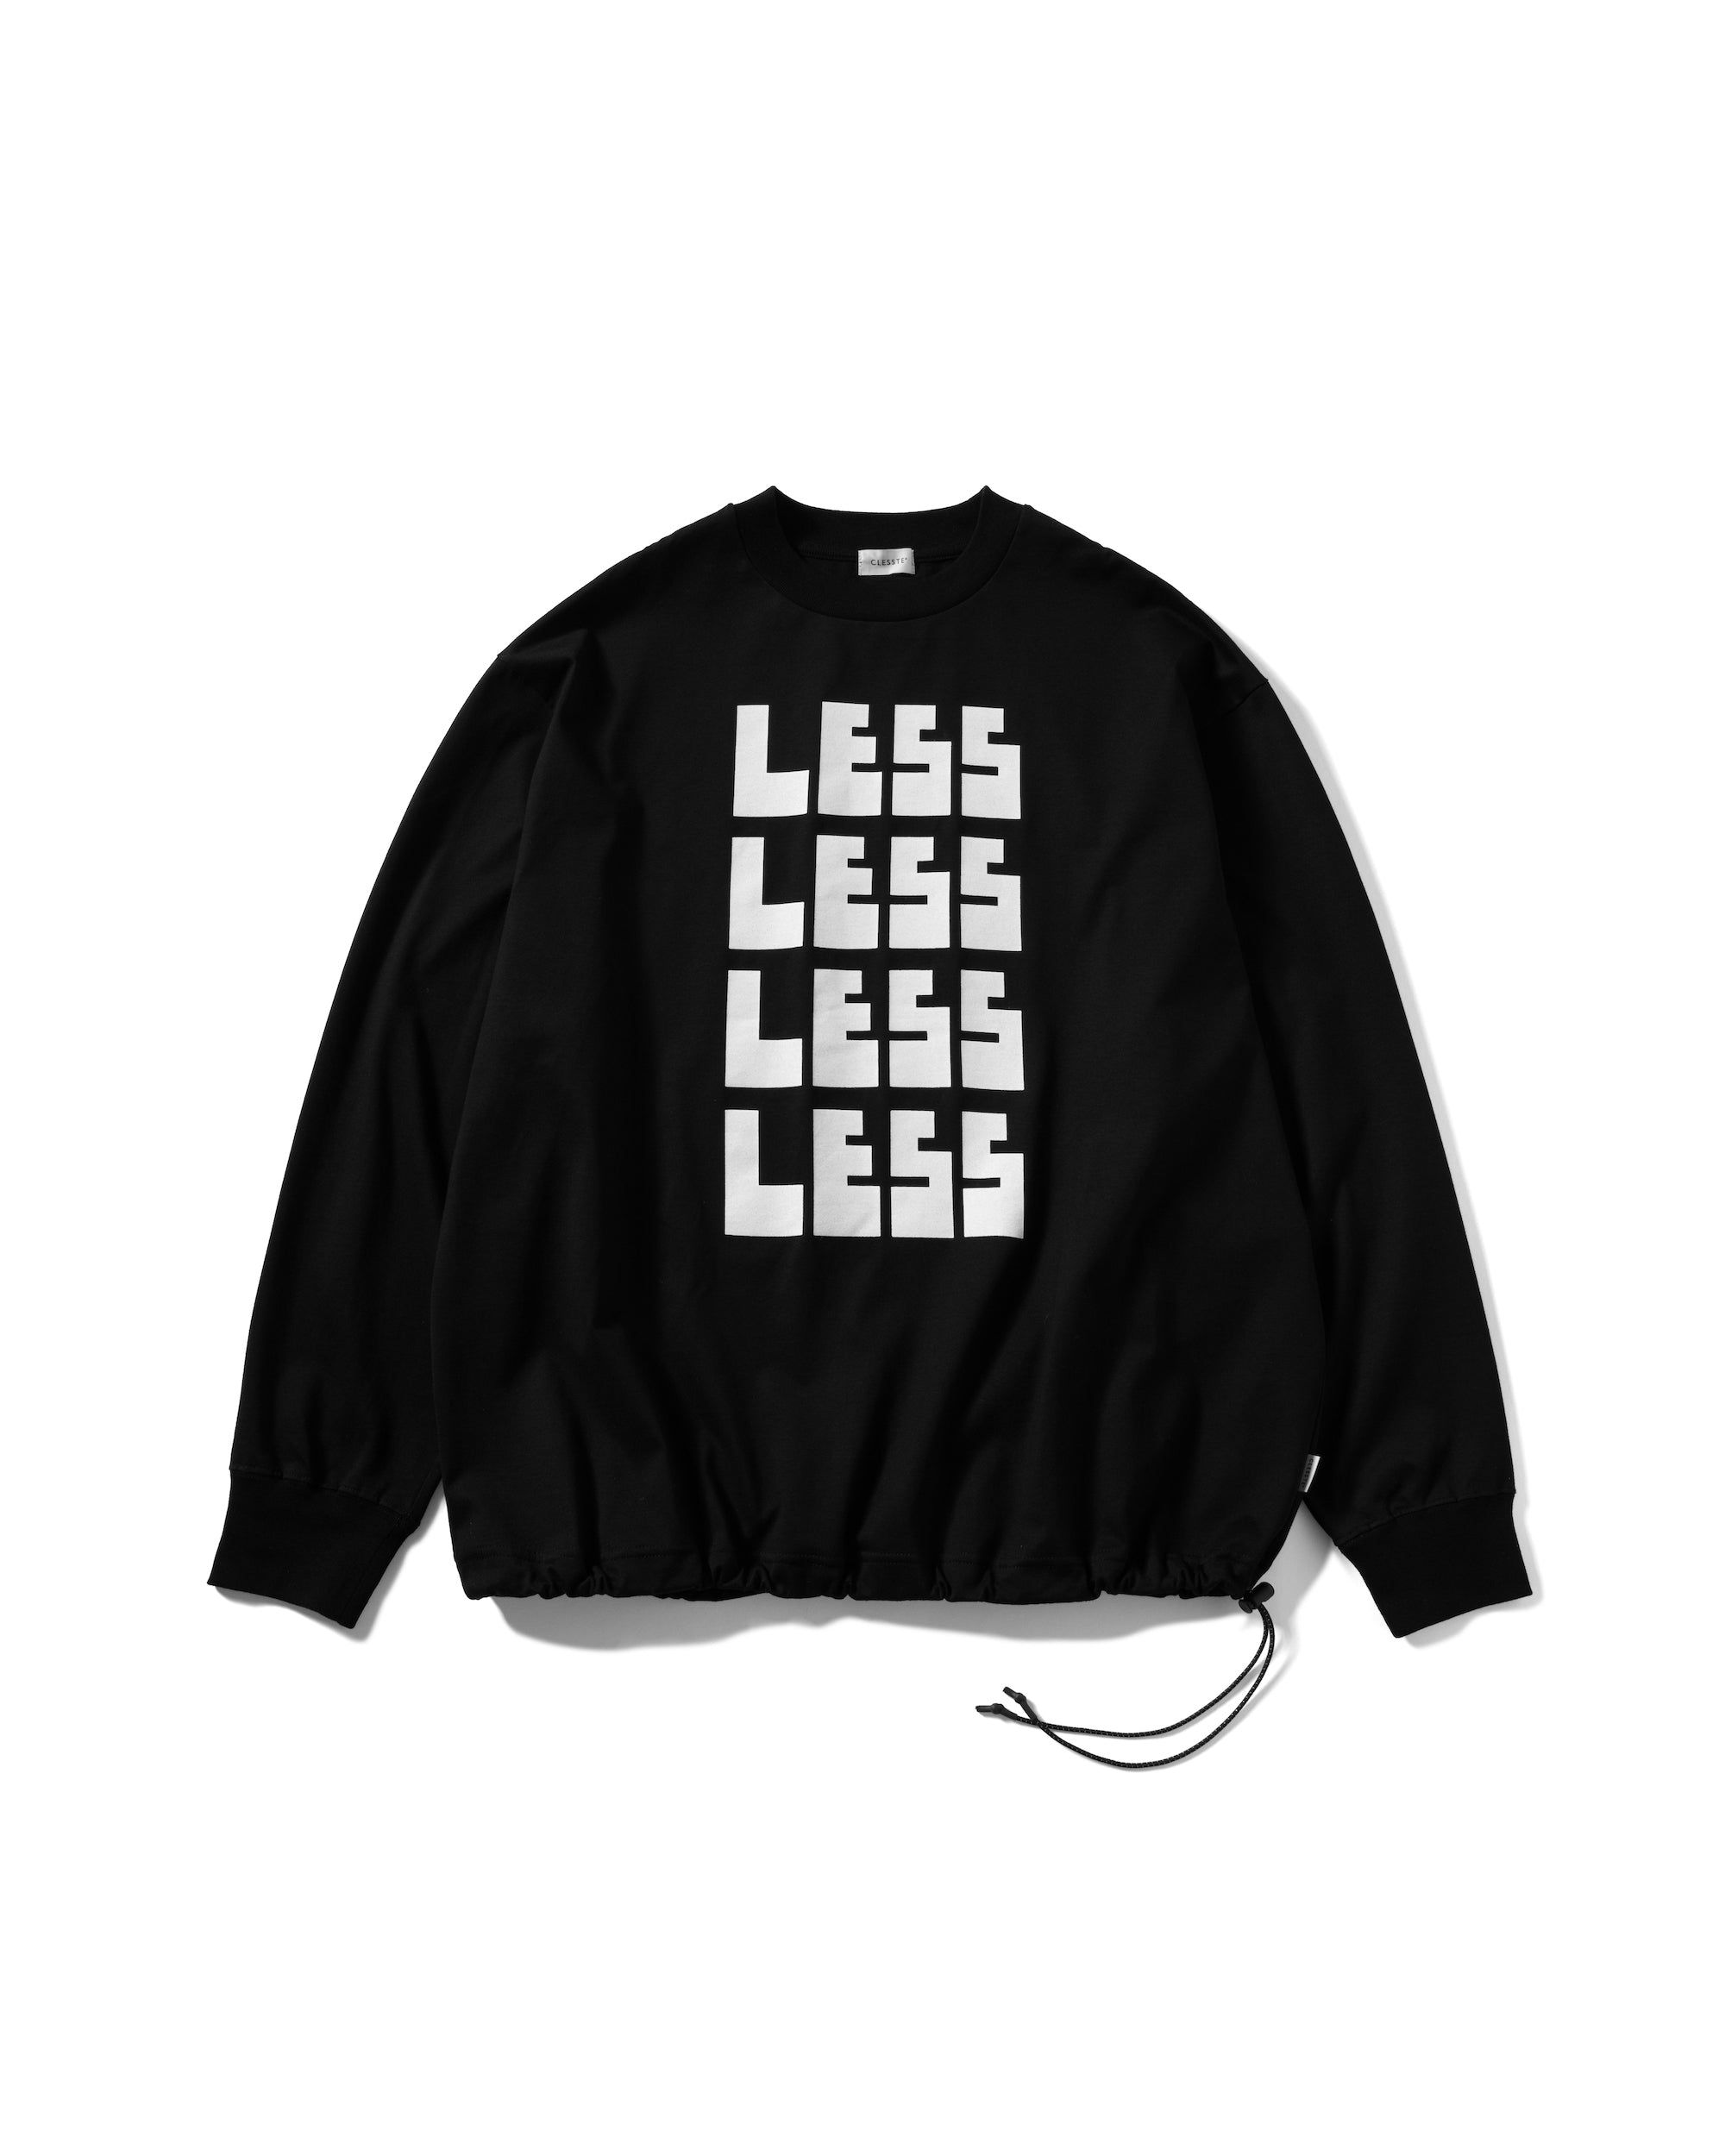 【4.17 WED 20:00- IN STOCK】"LESS" MASSIVE L/S T-SHIRT WITH DRAWSTRINGS